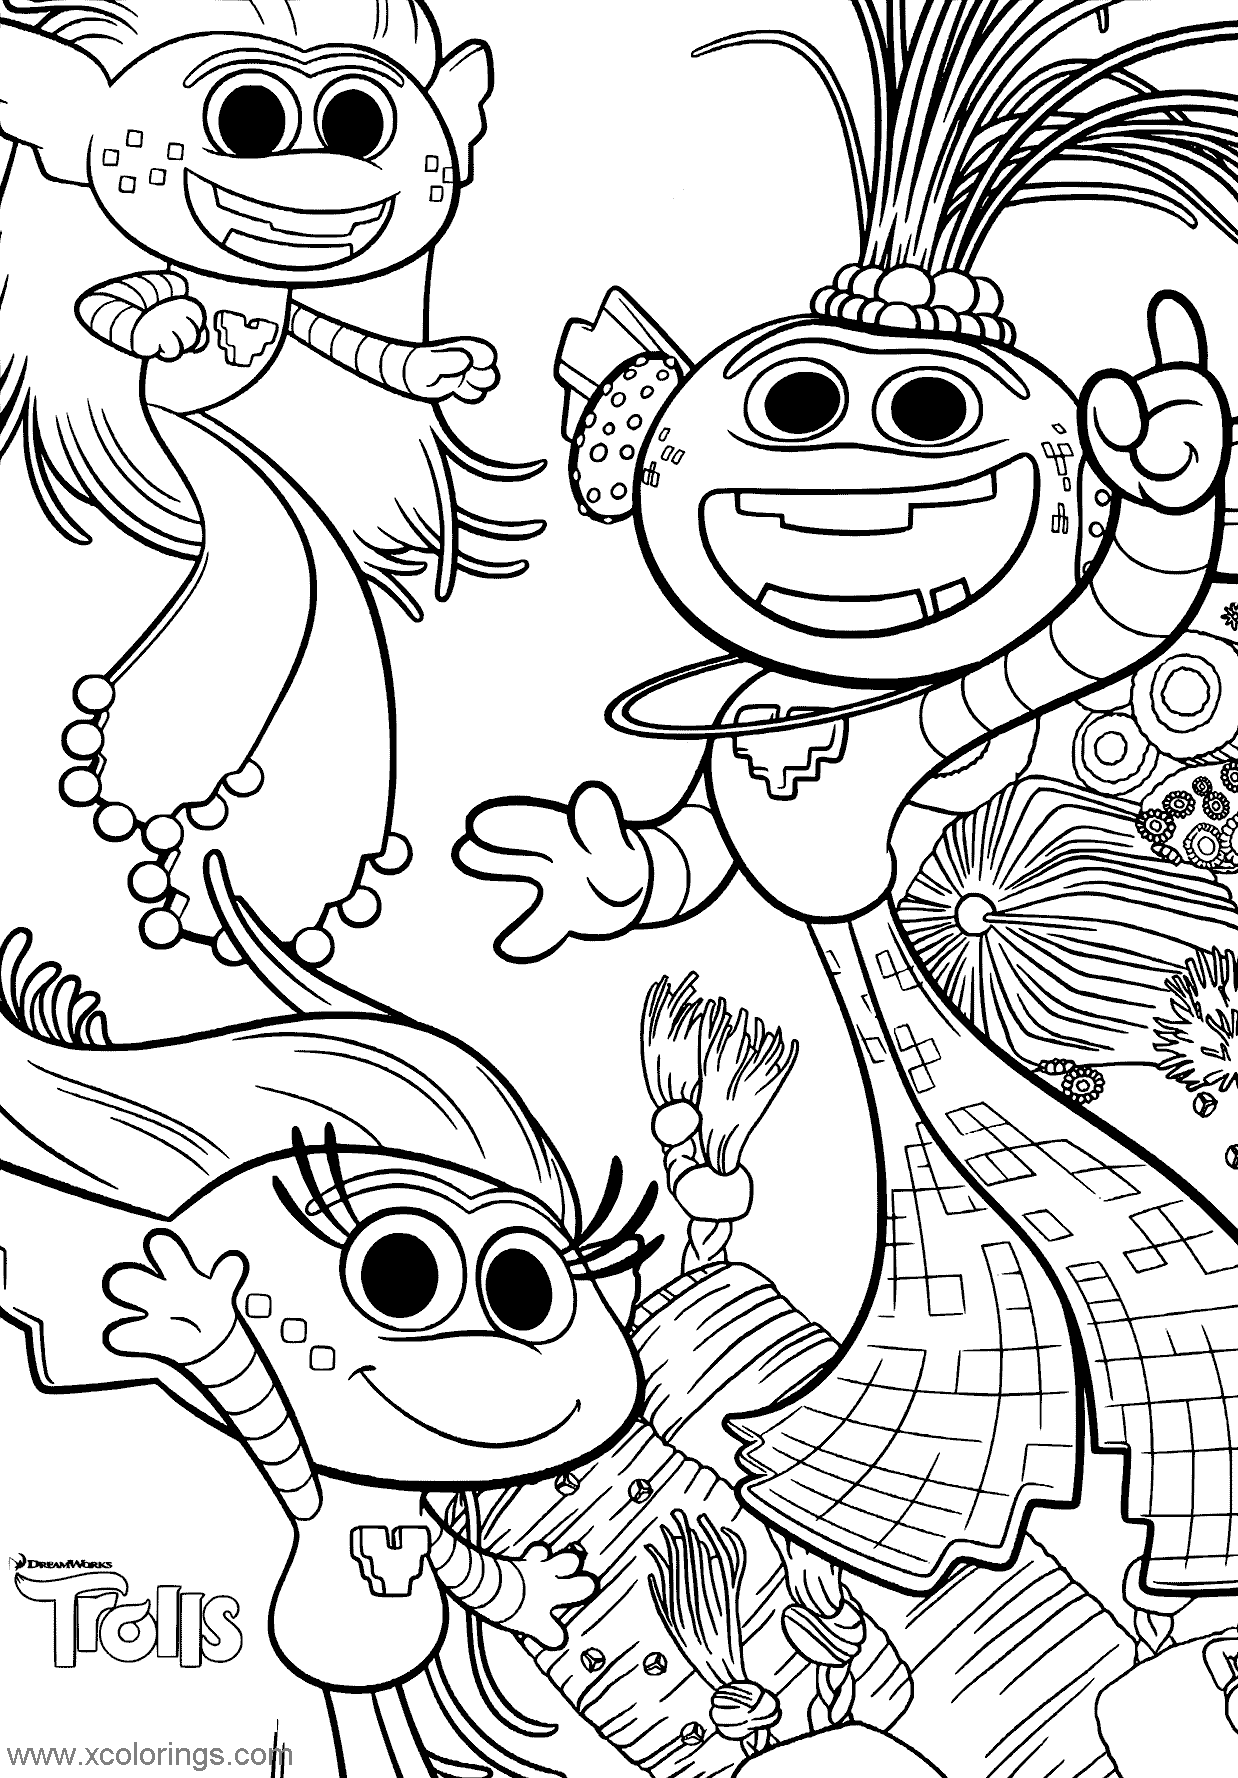 Free King and Queen from Trolls World Tour Coloring Pages printable